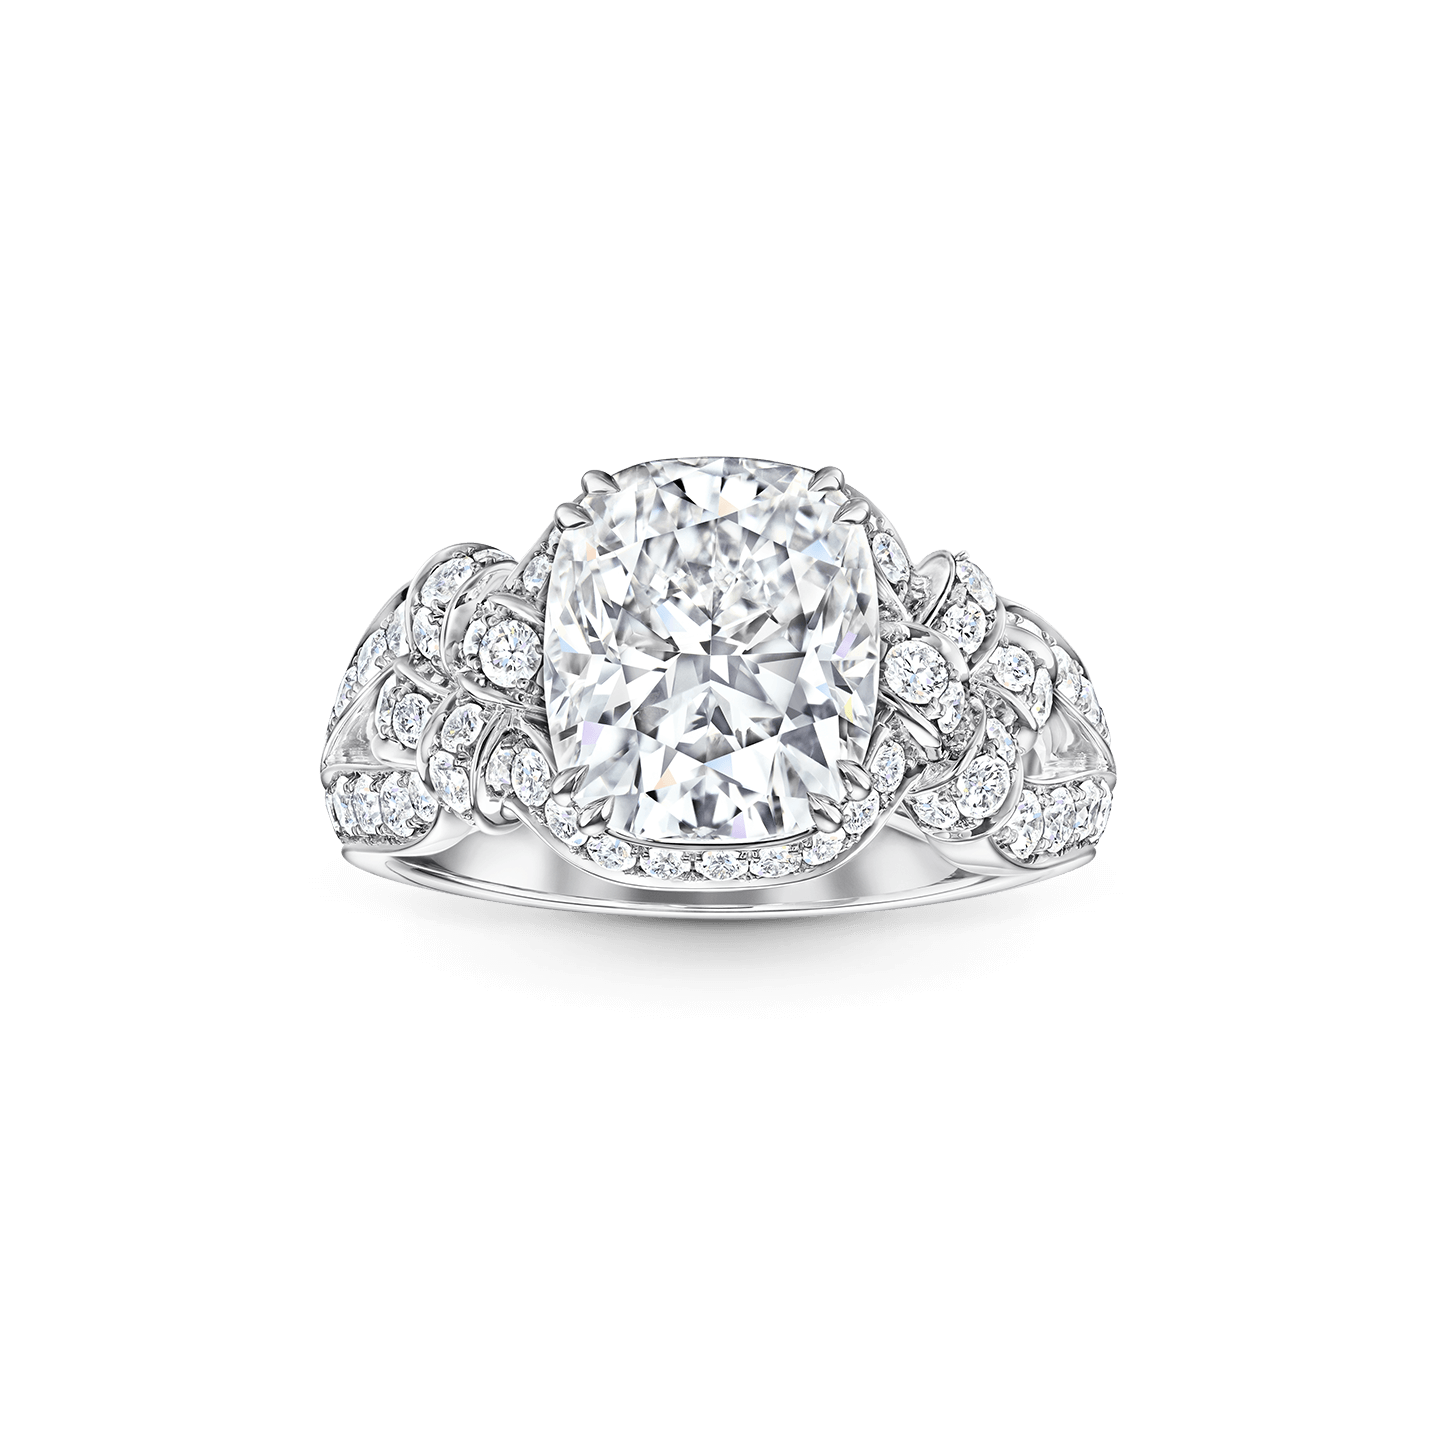 Front view of the Bridal Couture Cushion-Cut Diamond Engagement Ring